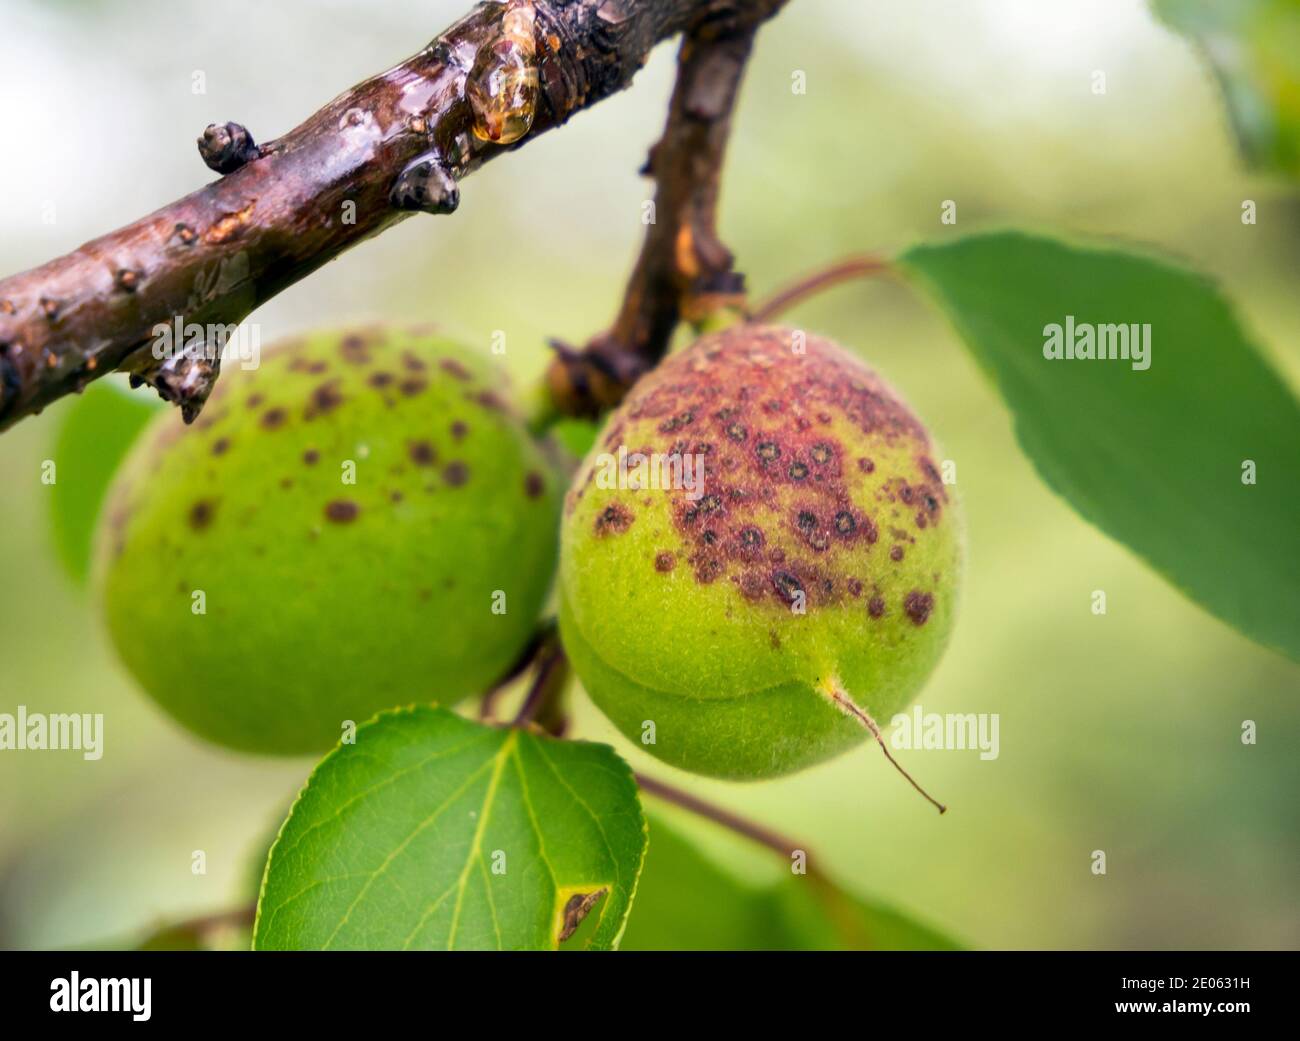 Green apricot fruits affected by perforated spot Stock Photo